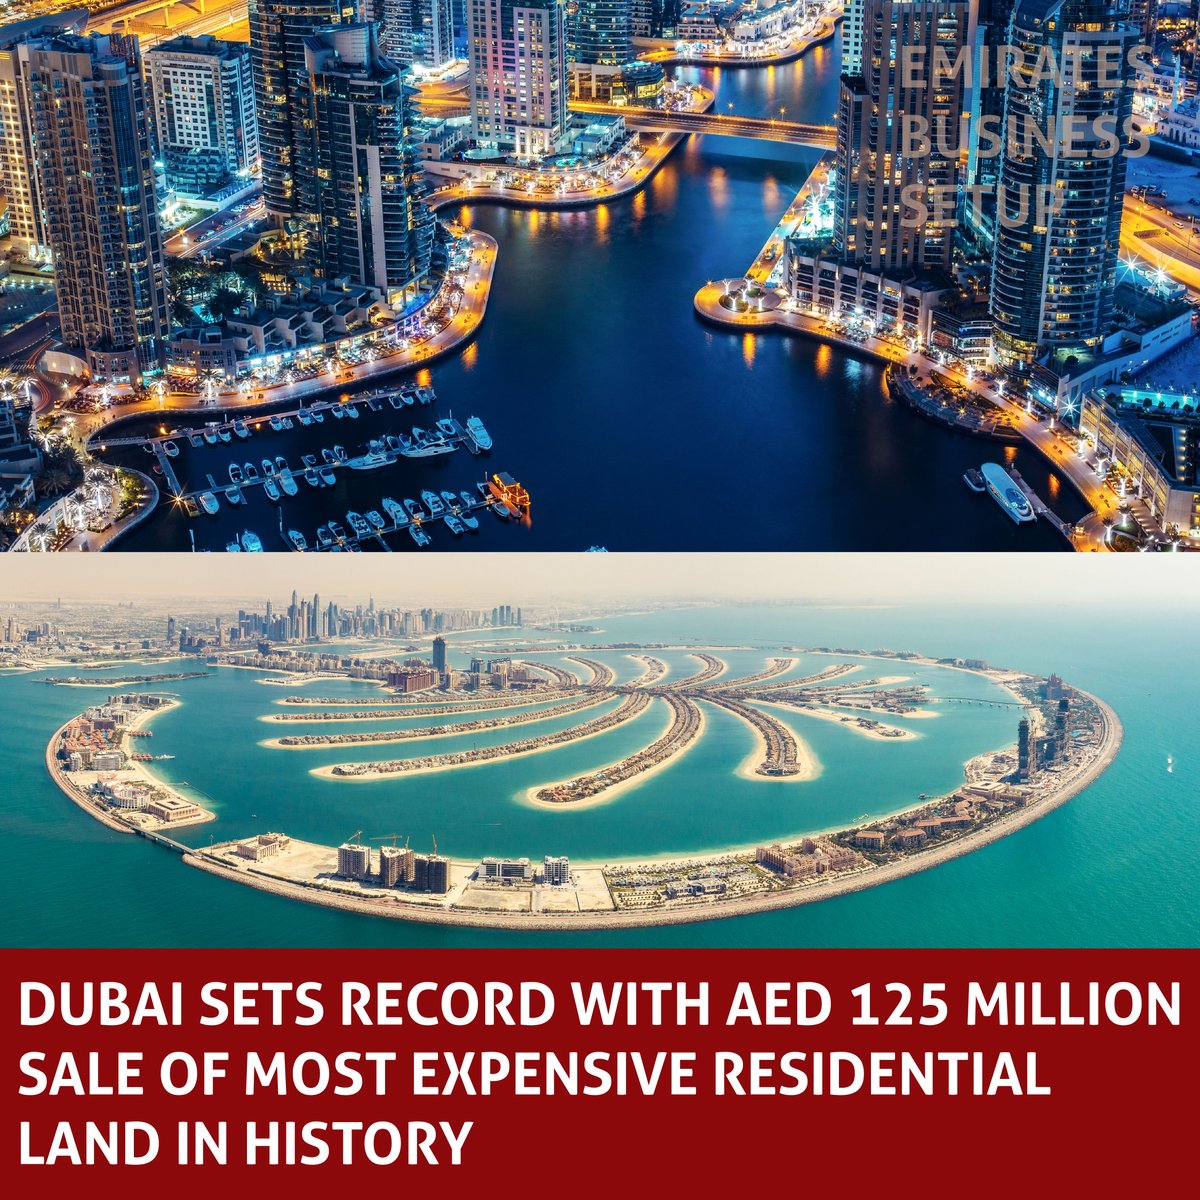 Dubai's most expensive residential land in the city's history sells for an incredible AED 125 million. 

#Dubairealestate #uae #Dubai #residentialland #dubaiproperty #luxuryproperty #recordbreakingsale #Dubaiwealth  #dubaipropertyinvestment  #dubaiinvestment #movetodubai